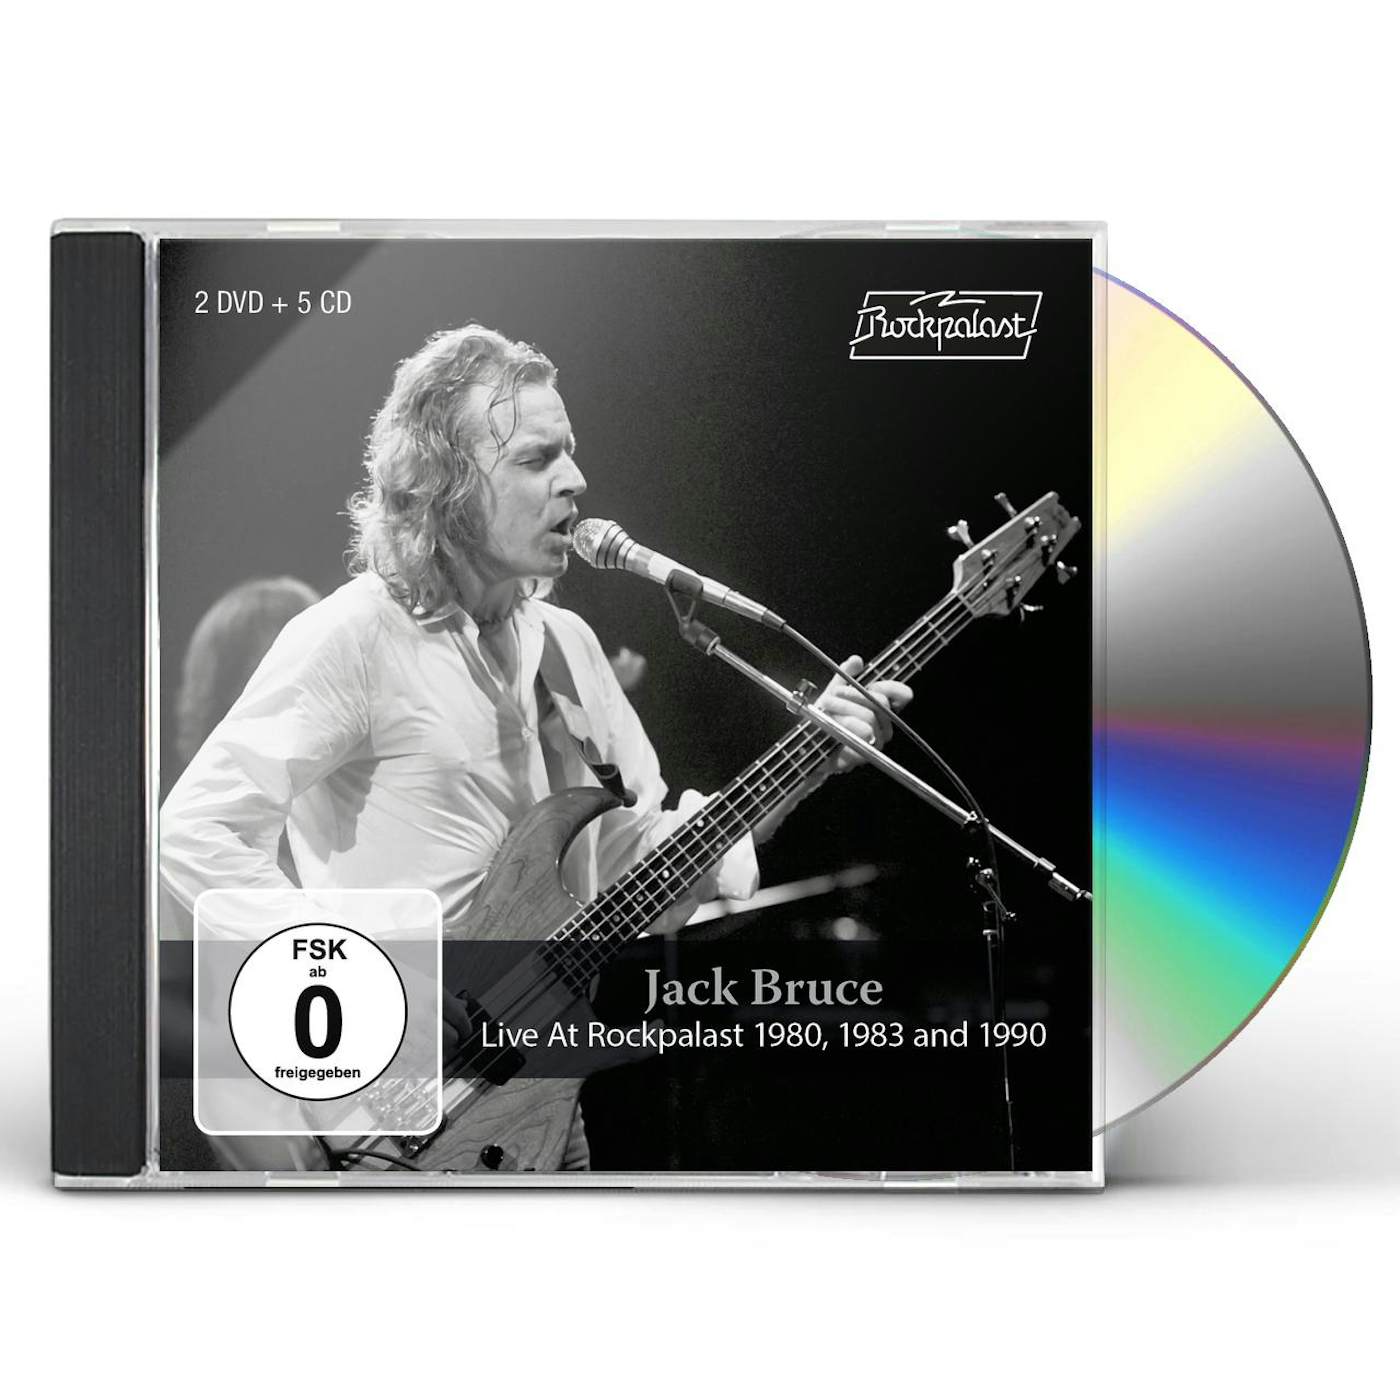 Jack Bruce LIVE AT ROCKPALAST 1980, 1983 AND 1990 CD